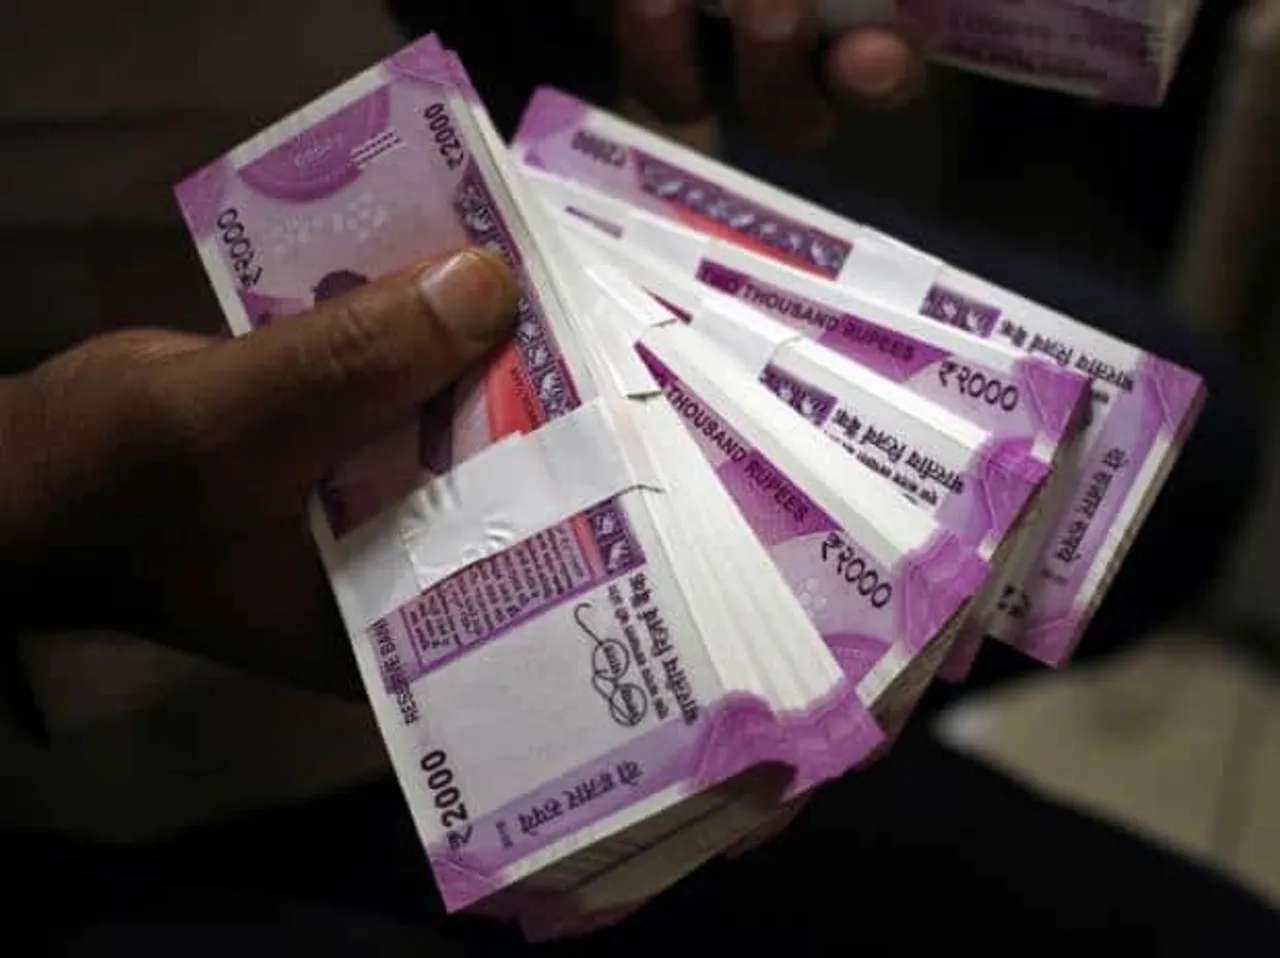 Demonetisation: An important first step to curb the black money menace?